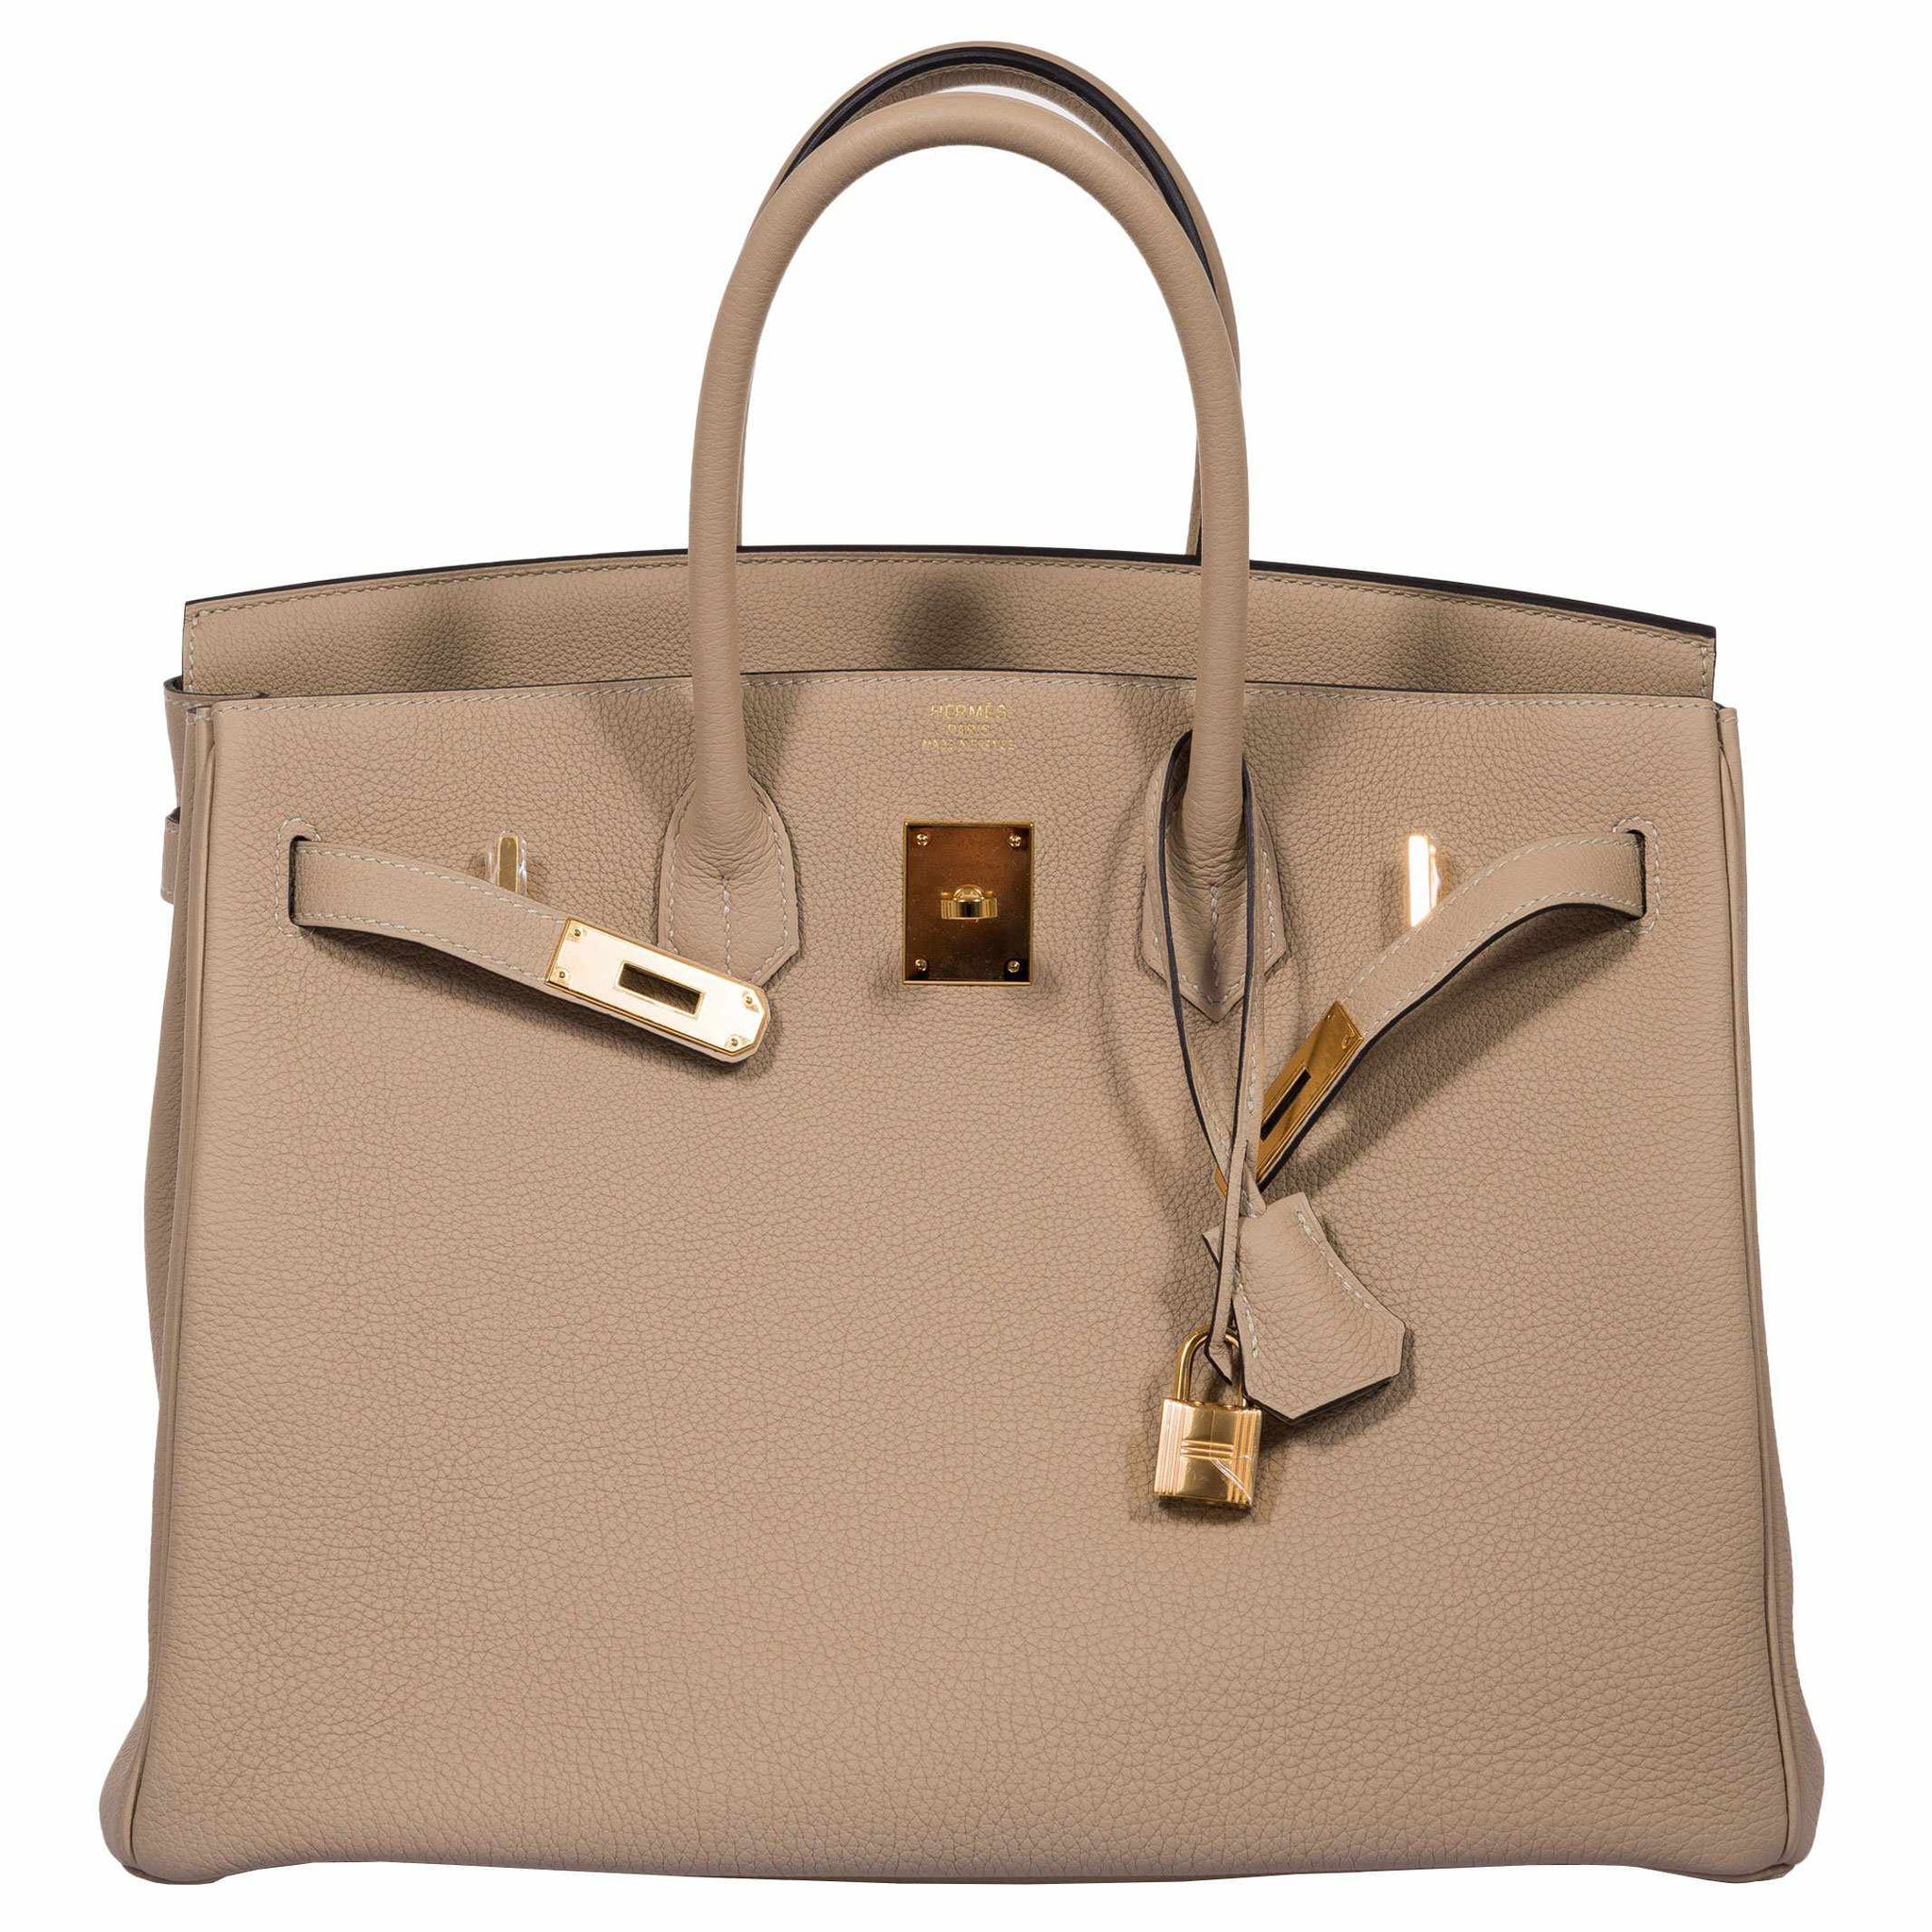 Hermes Kelly Mini Pochette Bag Trench Ostrich Leather Gold